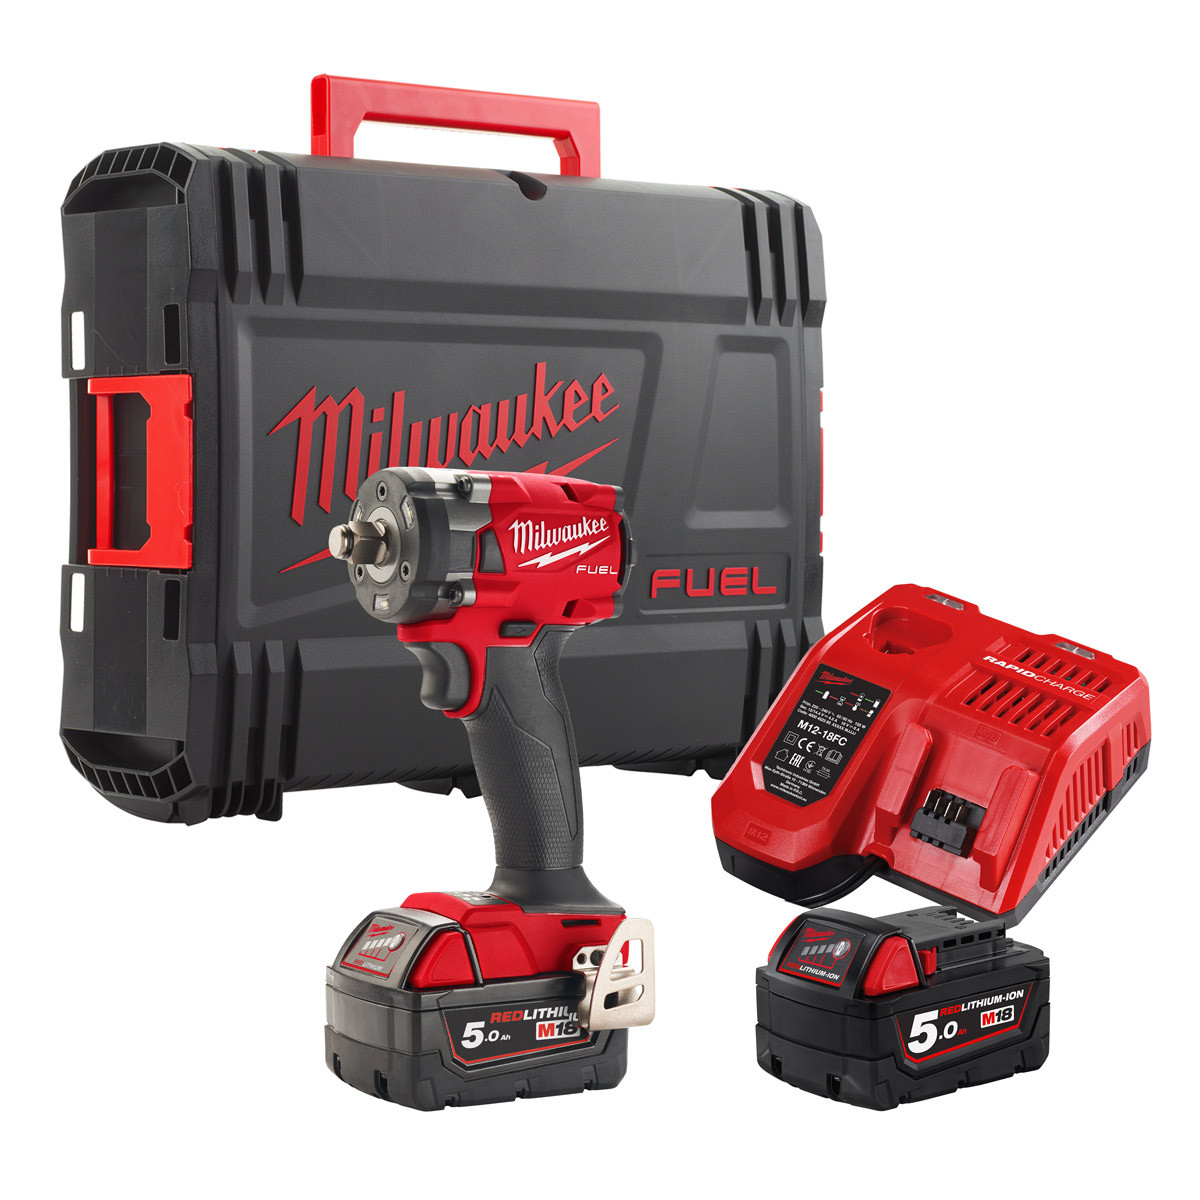 Milwaukee M18FIW2F12 18V Fuel Brushless 2nd Gen 1/2in Impact Wrench - 5.0ah Pack